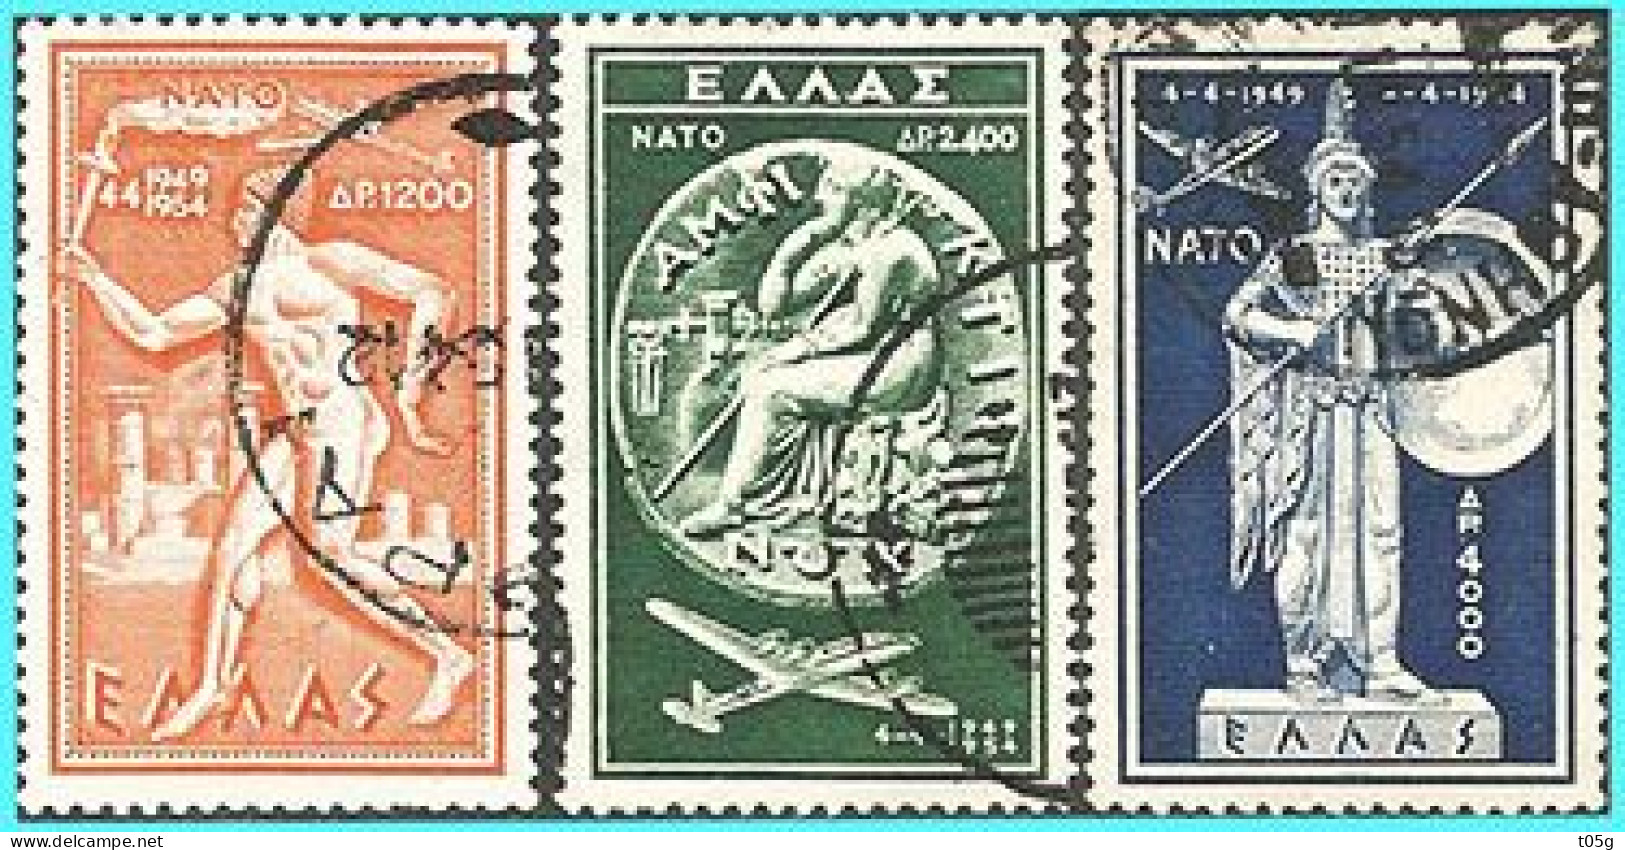 GREECE- GRECE - HELLAS 1954: Airpost Stamps:  " NATO" Compl. Set Used - Oblitérés